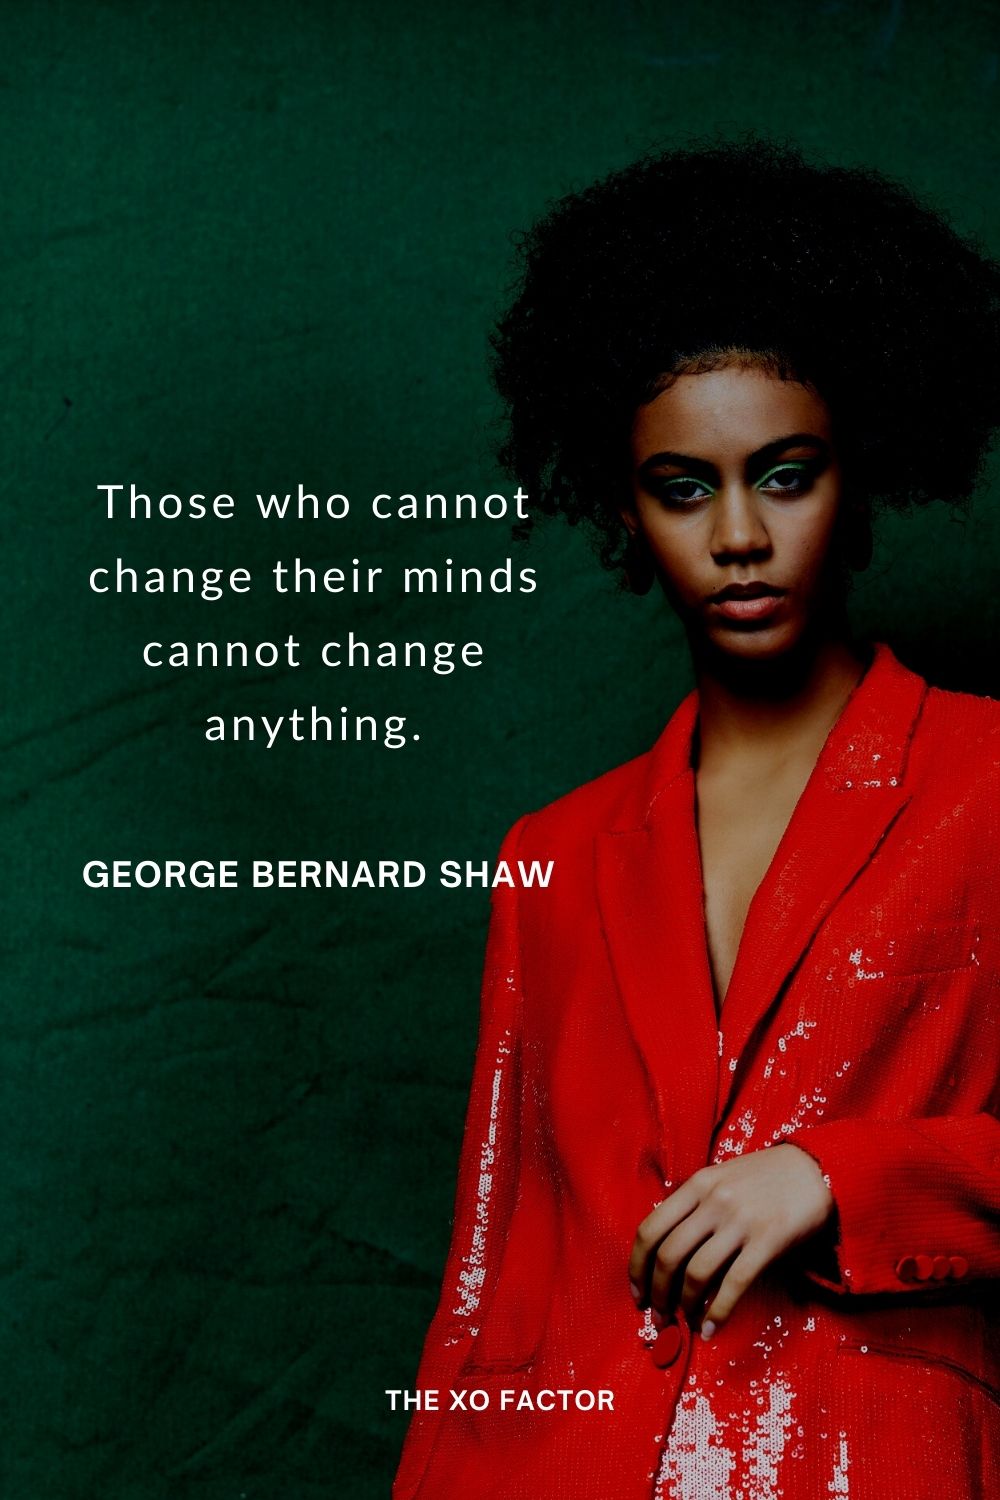 Those who cannot change their minds cannot change anything. George Bernard Shaw